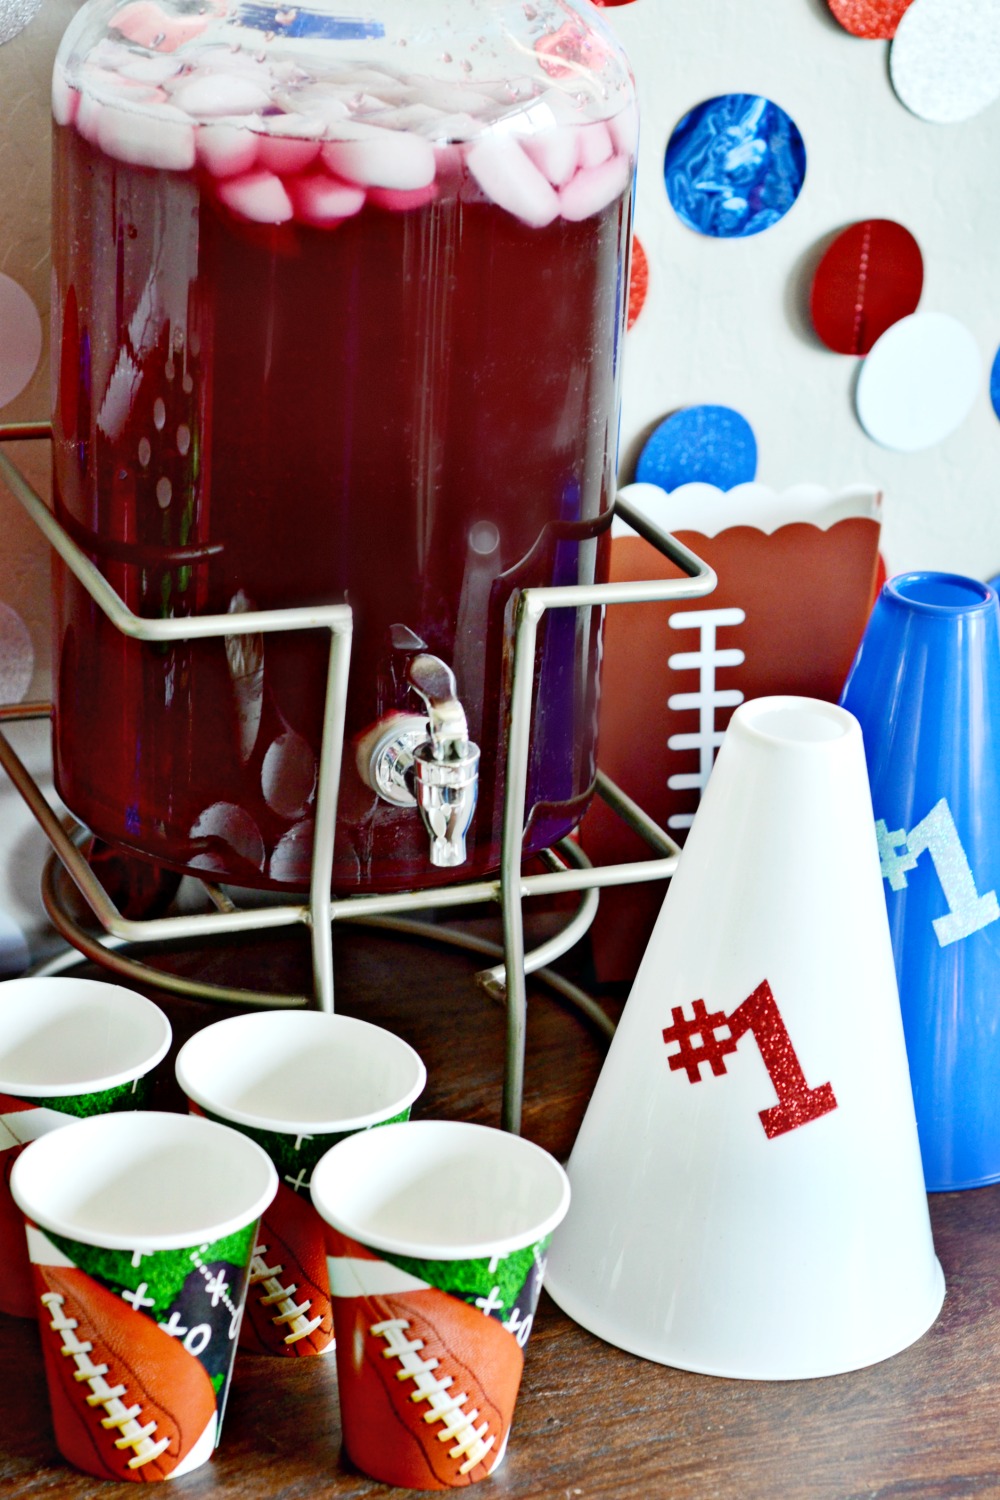 Serve punch coordinating with your favorite teams' colors at your college football party.